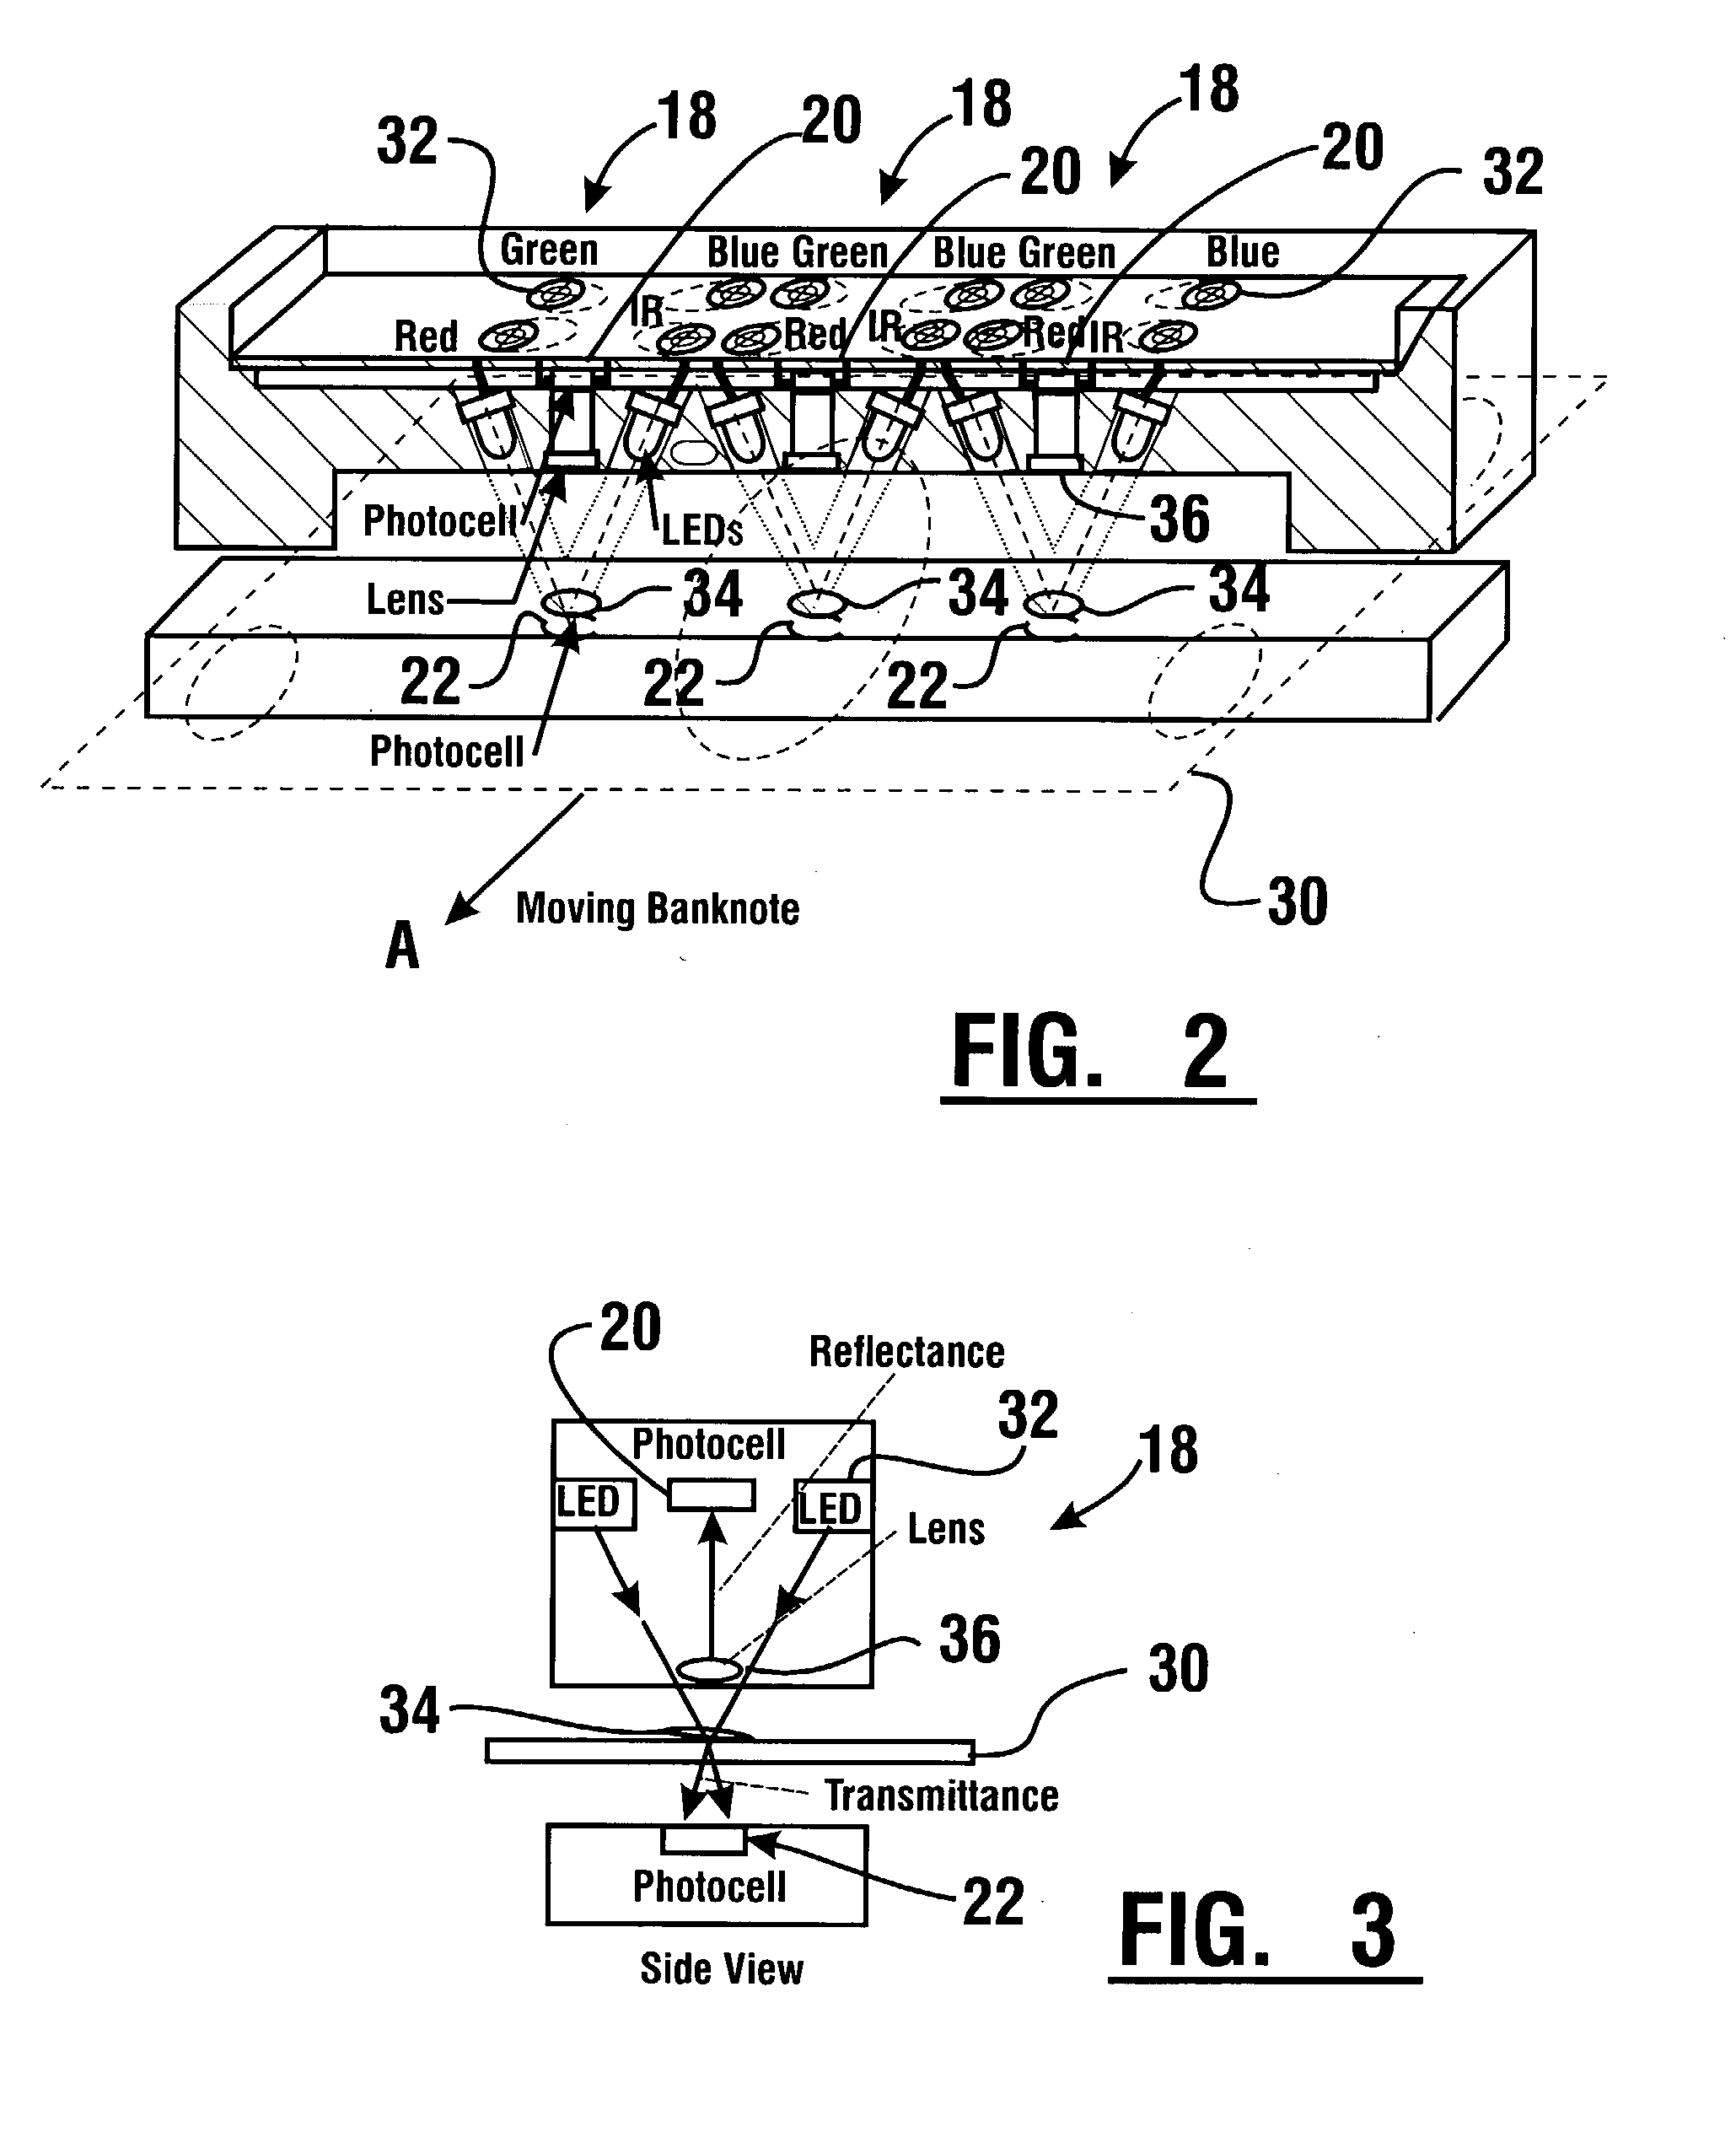 Apparatus and method for correlating a suspect note deposited in an automated banking machine with the depositor